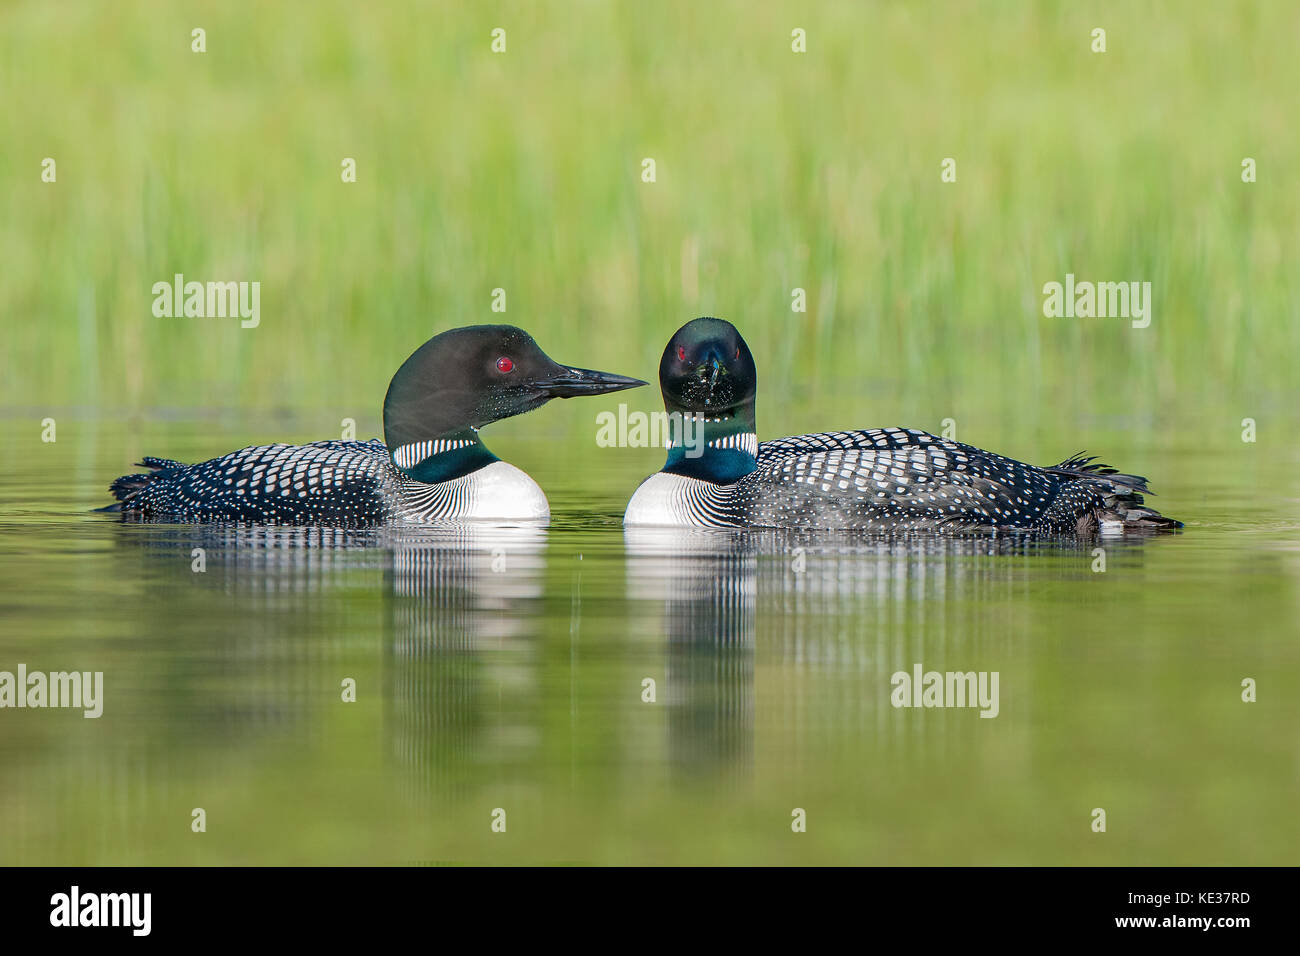 Mating pair of common loons (Gavia immer), central Alberta, Canada Stock Photo